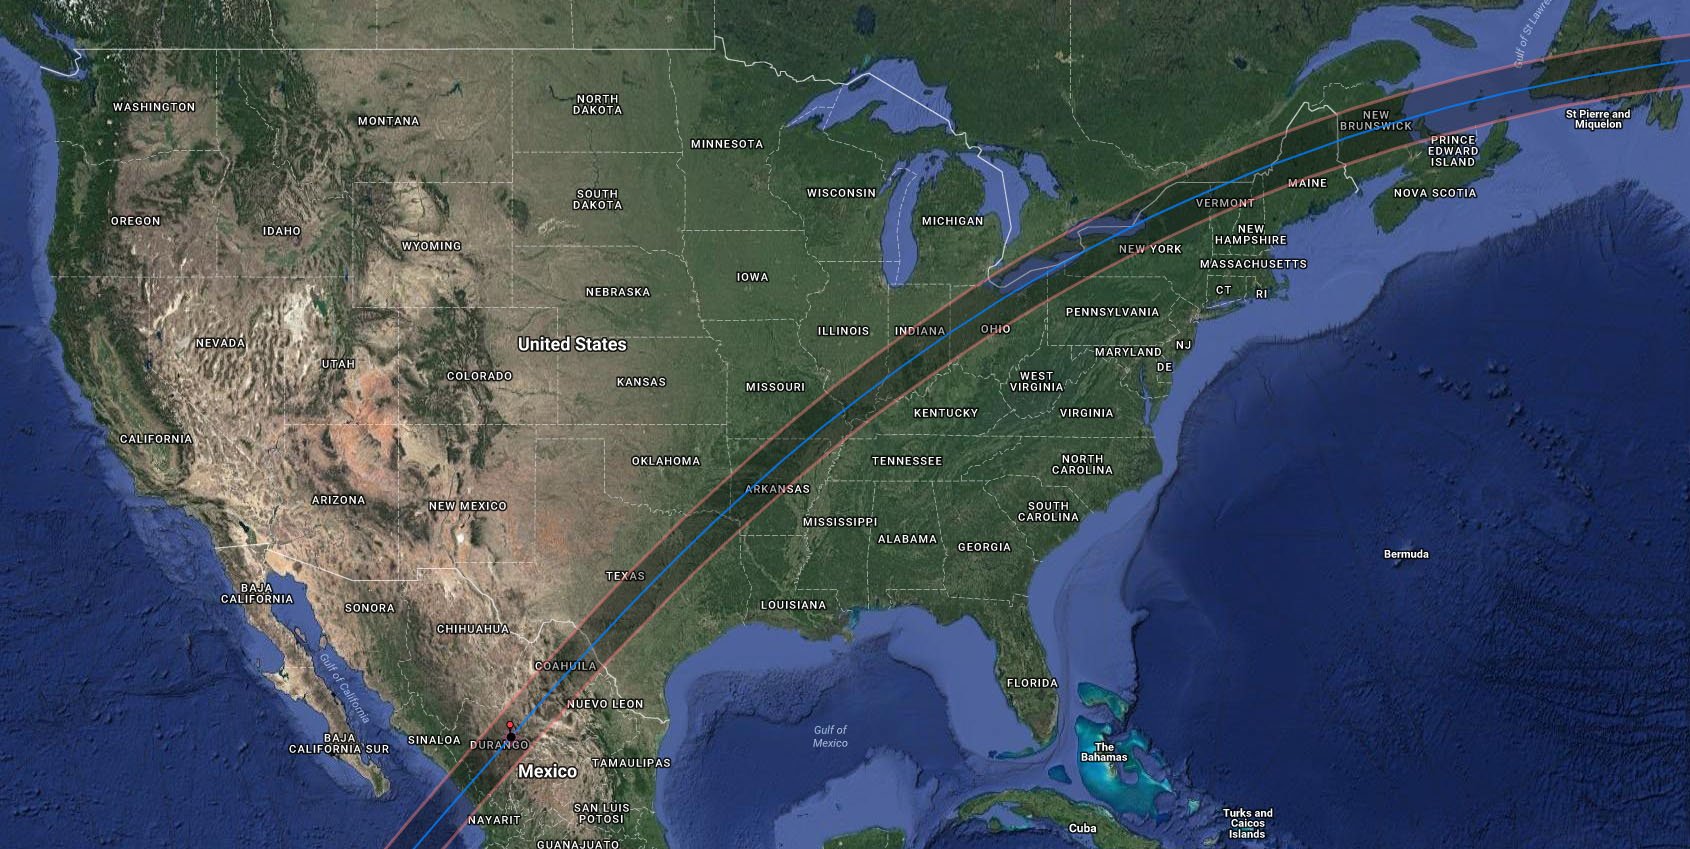 Solar Eclipse May Cause Flight Disruptions on April 8th